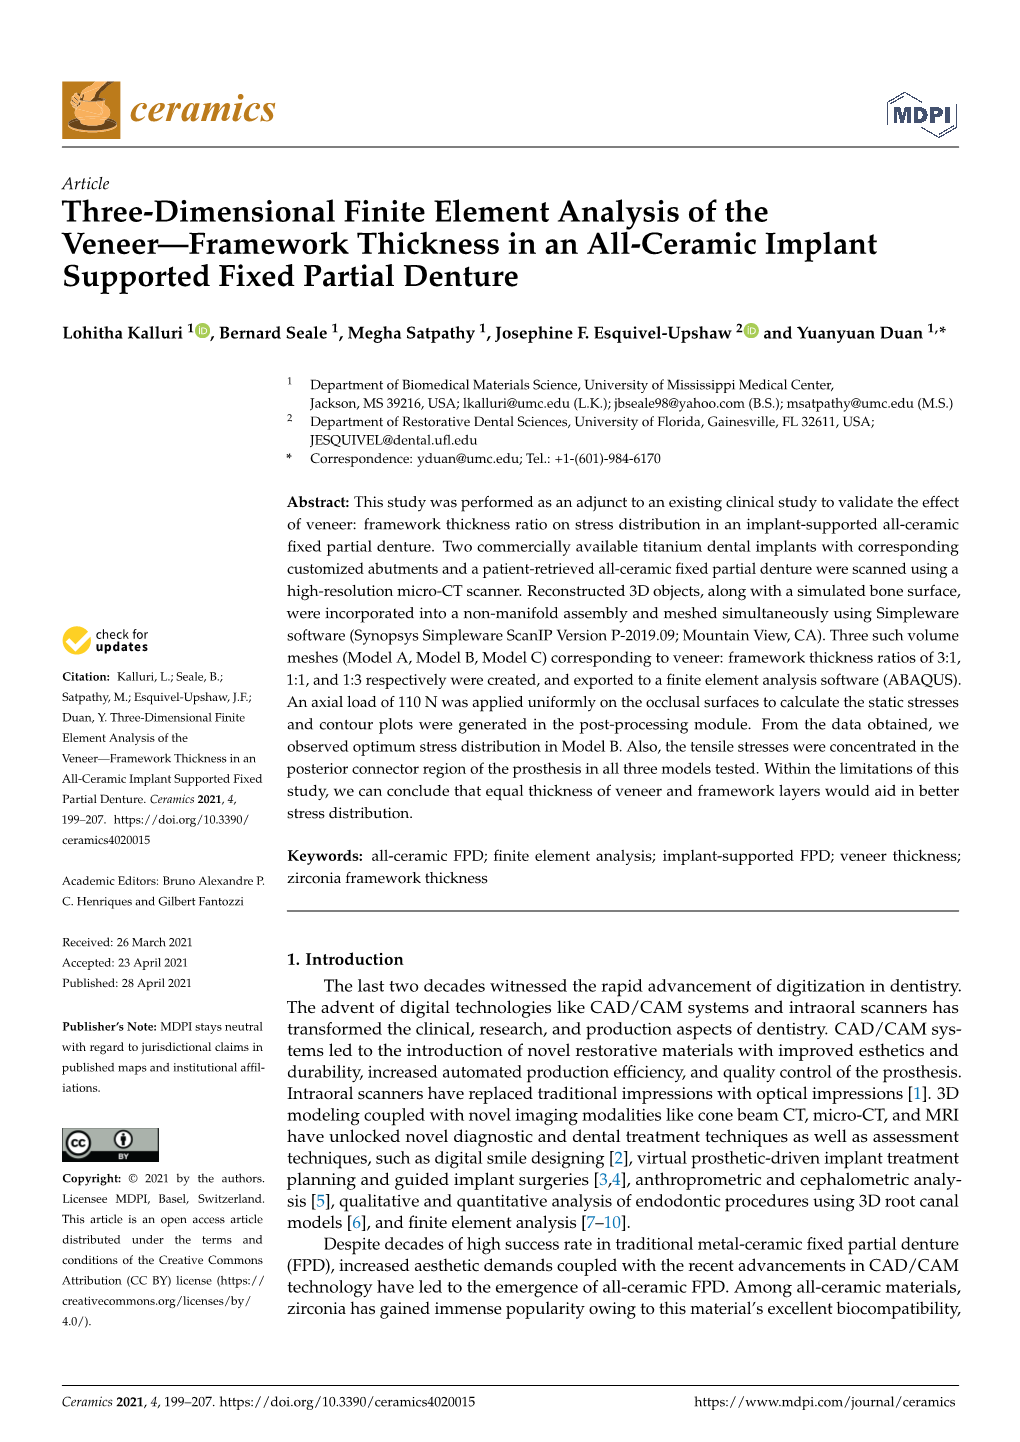 Three-Dimensional Finite Element Analysis of the Veneer—Framework Thickness in an All-Ceramic Implant Supported Fixed Partial Denture